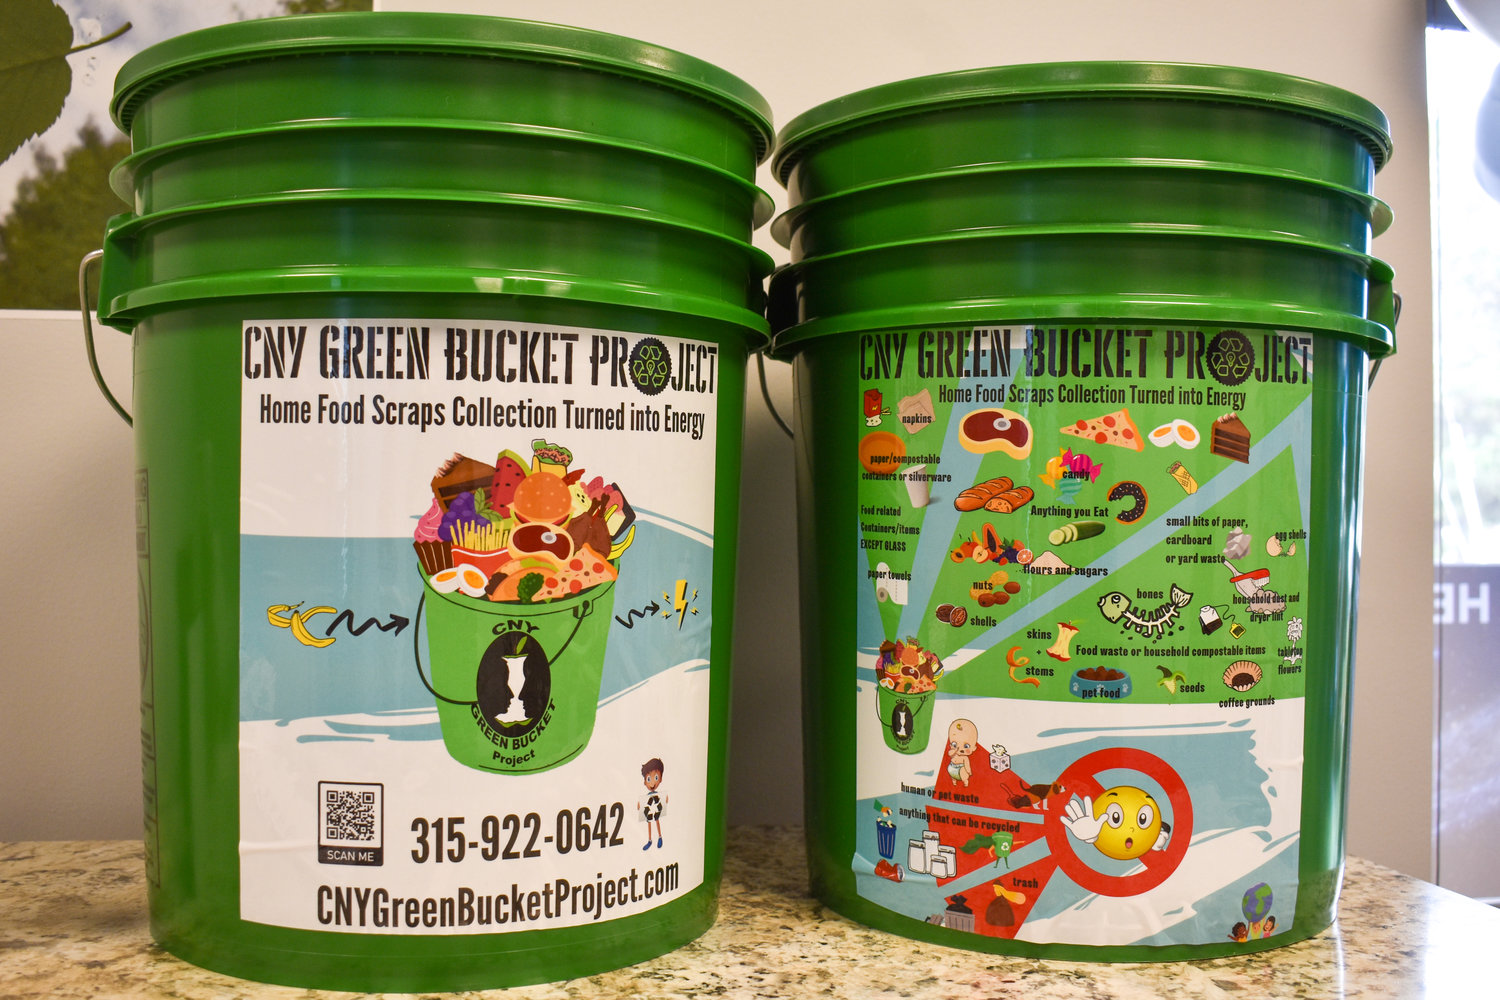 CNY Green Bucket Project turns residential food scraps into energy.